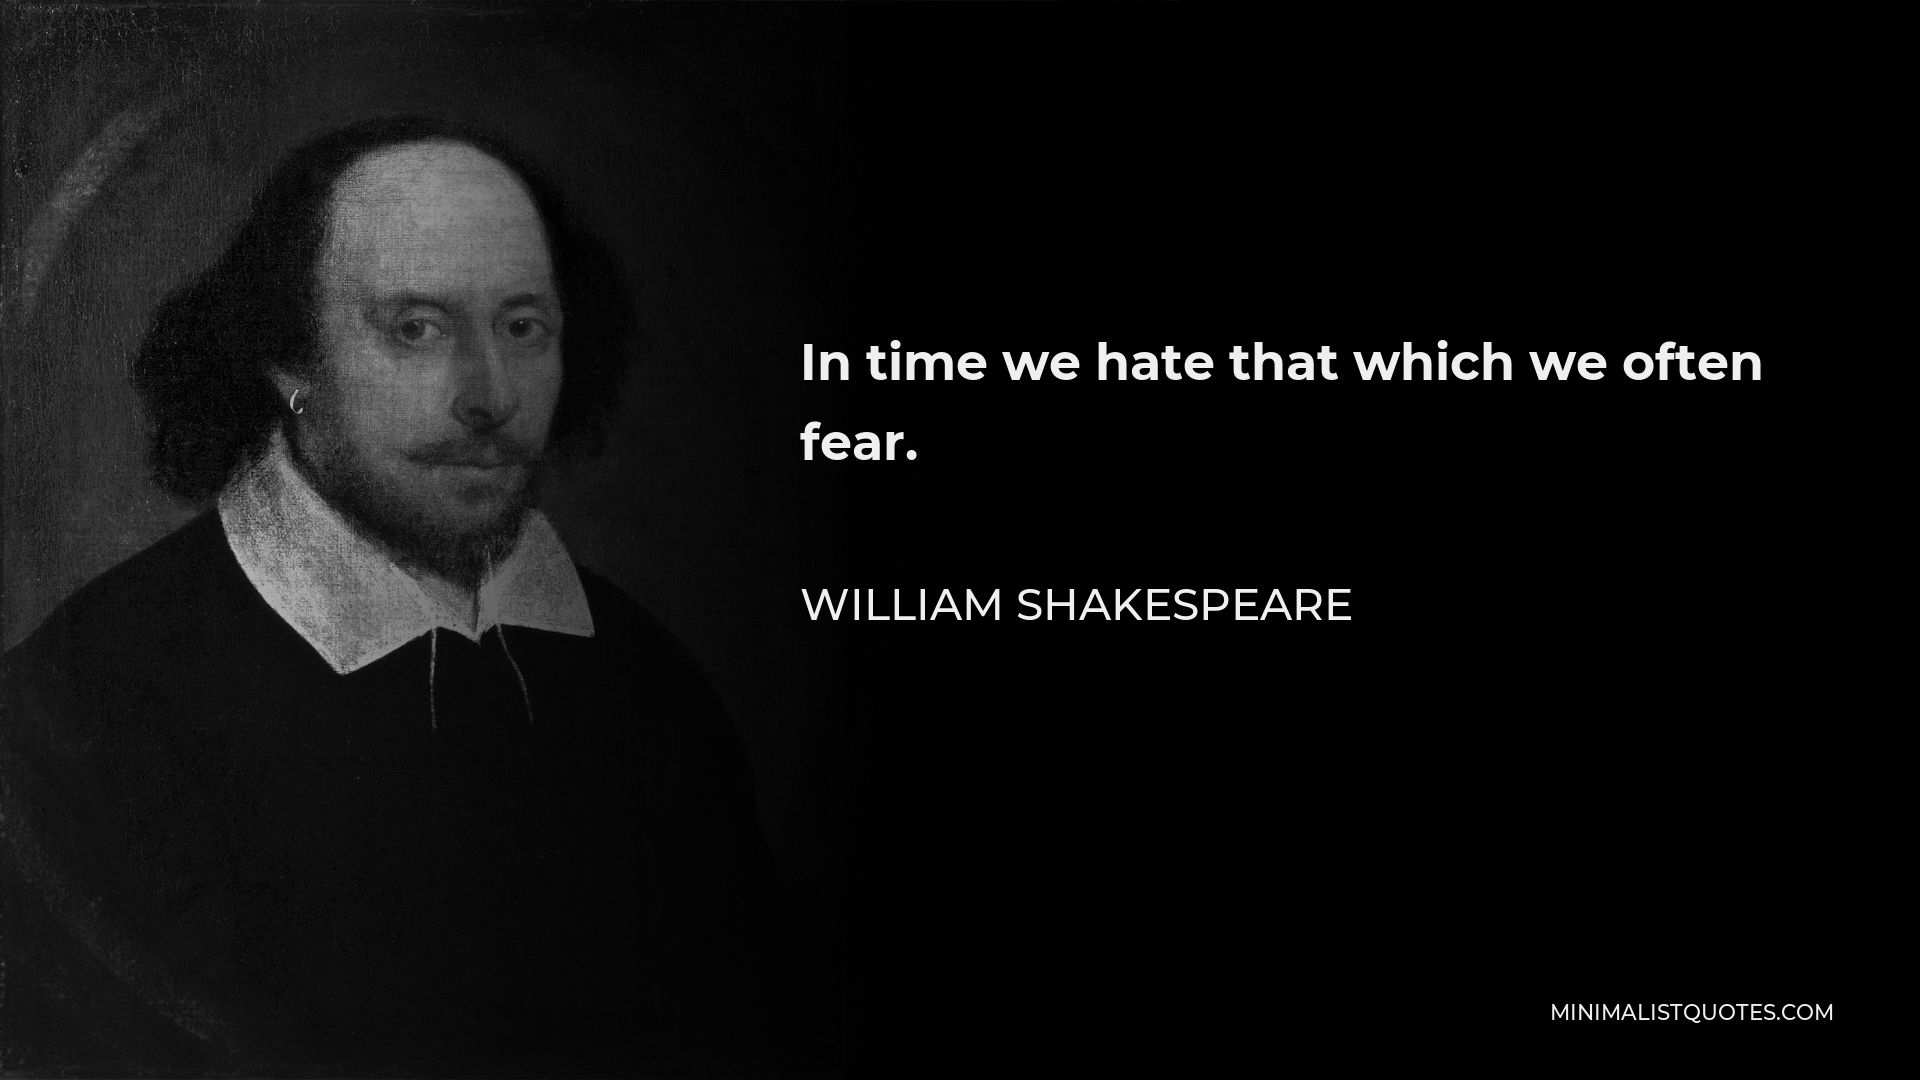 William Shakespeare Quote - In time we hate that which we often fear.